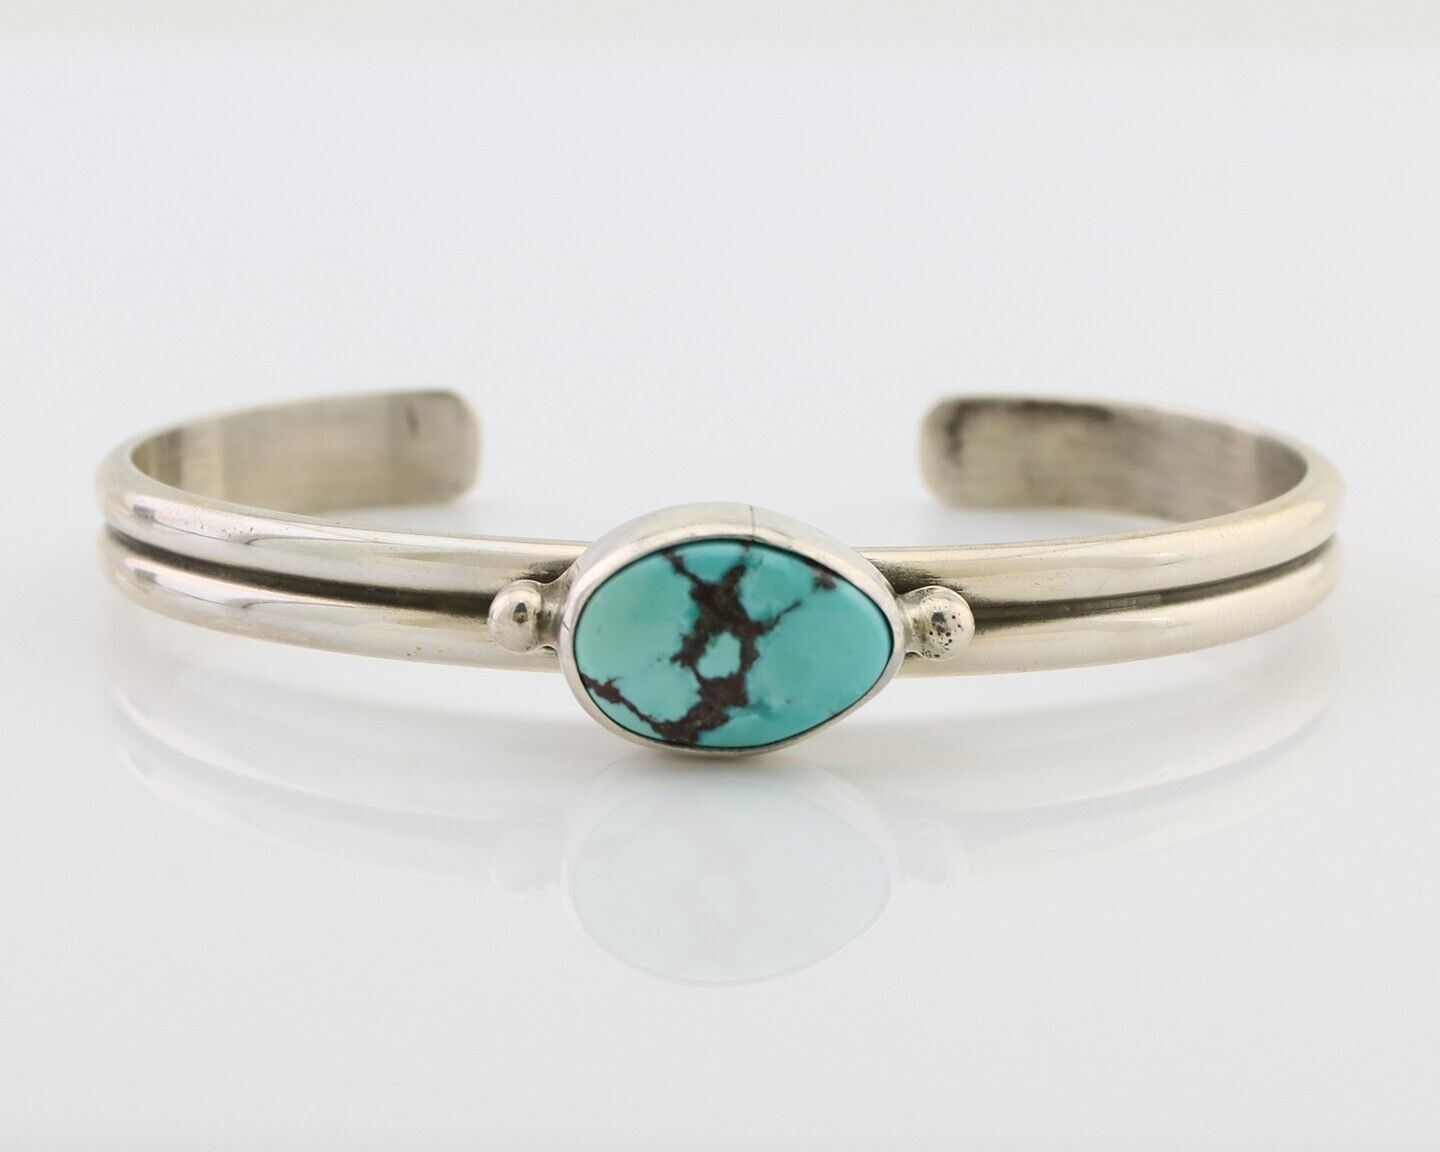 Navajo Cuff Bracelet 925 Silver Natural Blue Turquoise Native American C.80's